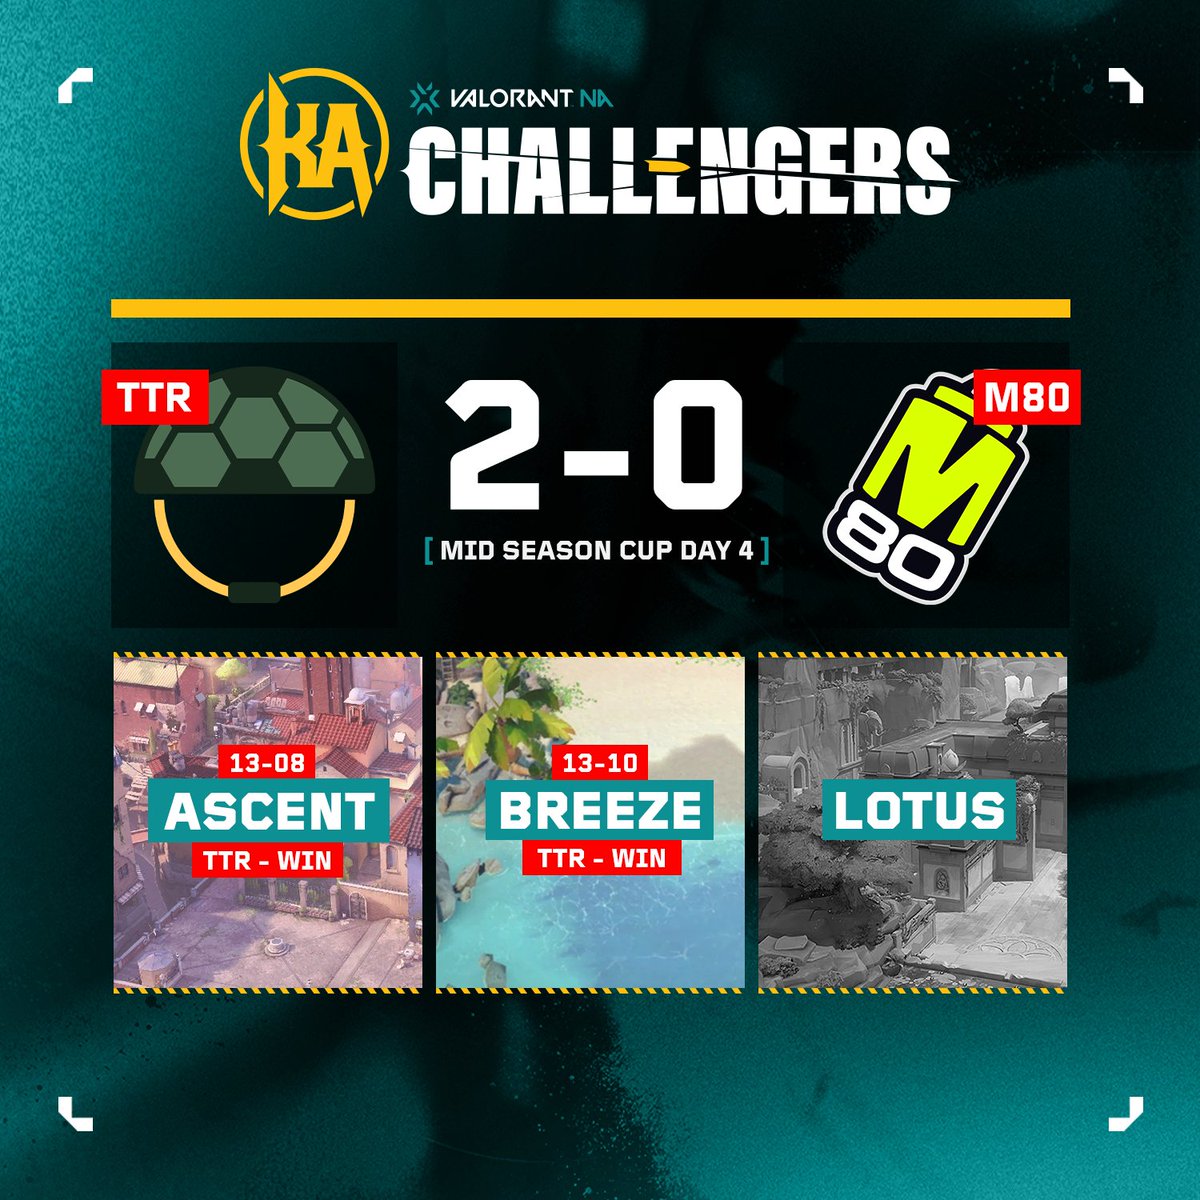 An insane series comes to an end with @turtletroopsval managing a 2-0 victory against @M80gg for Day 4 of #ChallengersNA Mid-Season Cup! The Grand Final will be live tomorrow at 4PM EST!